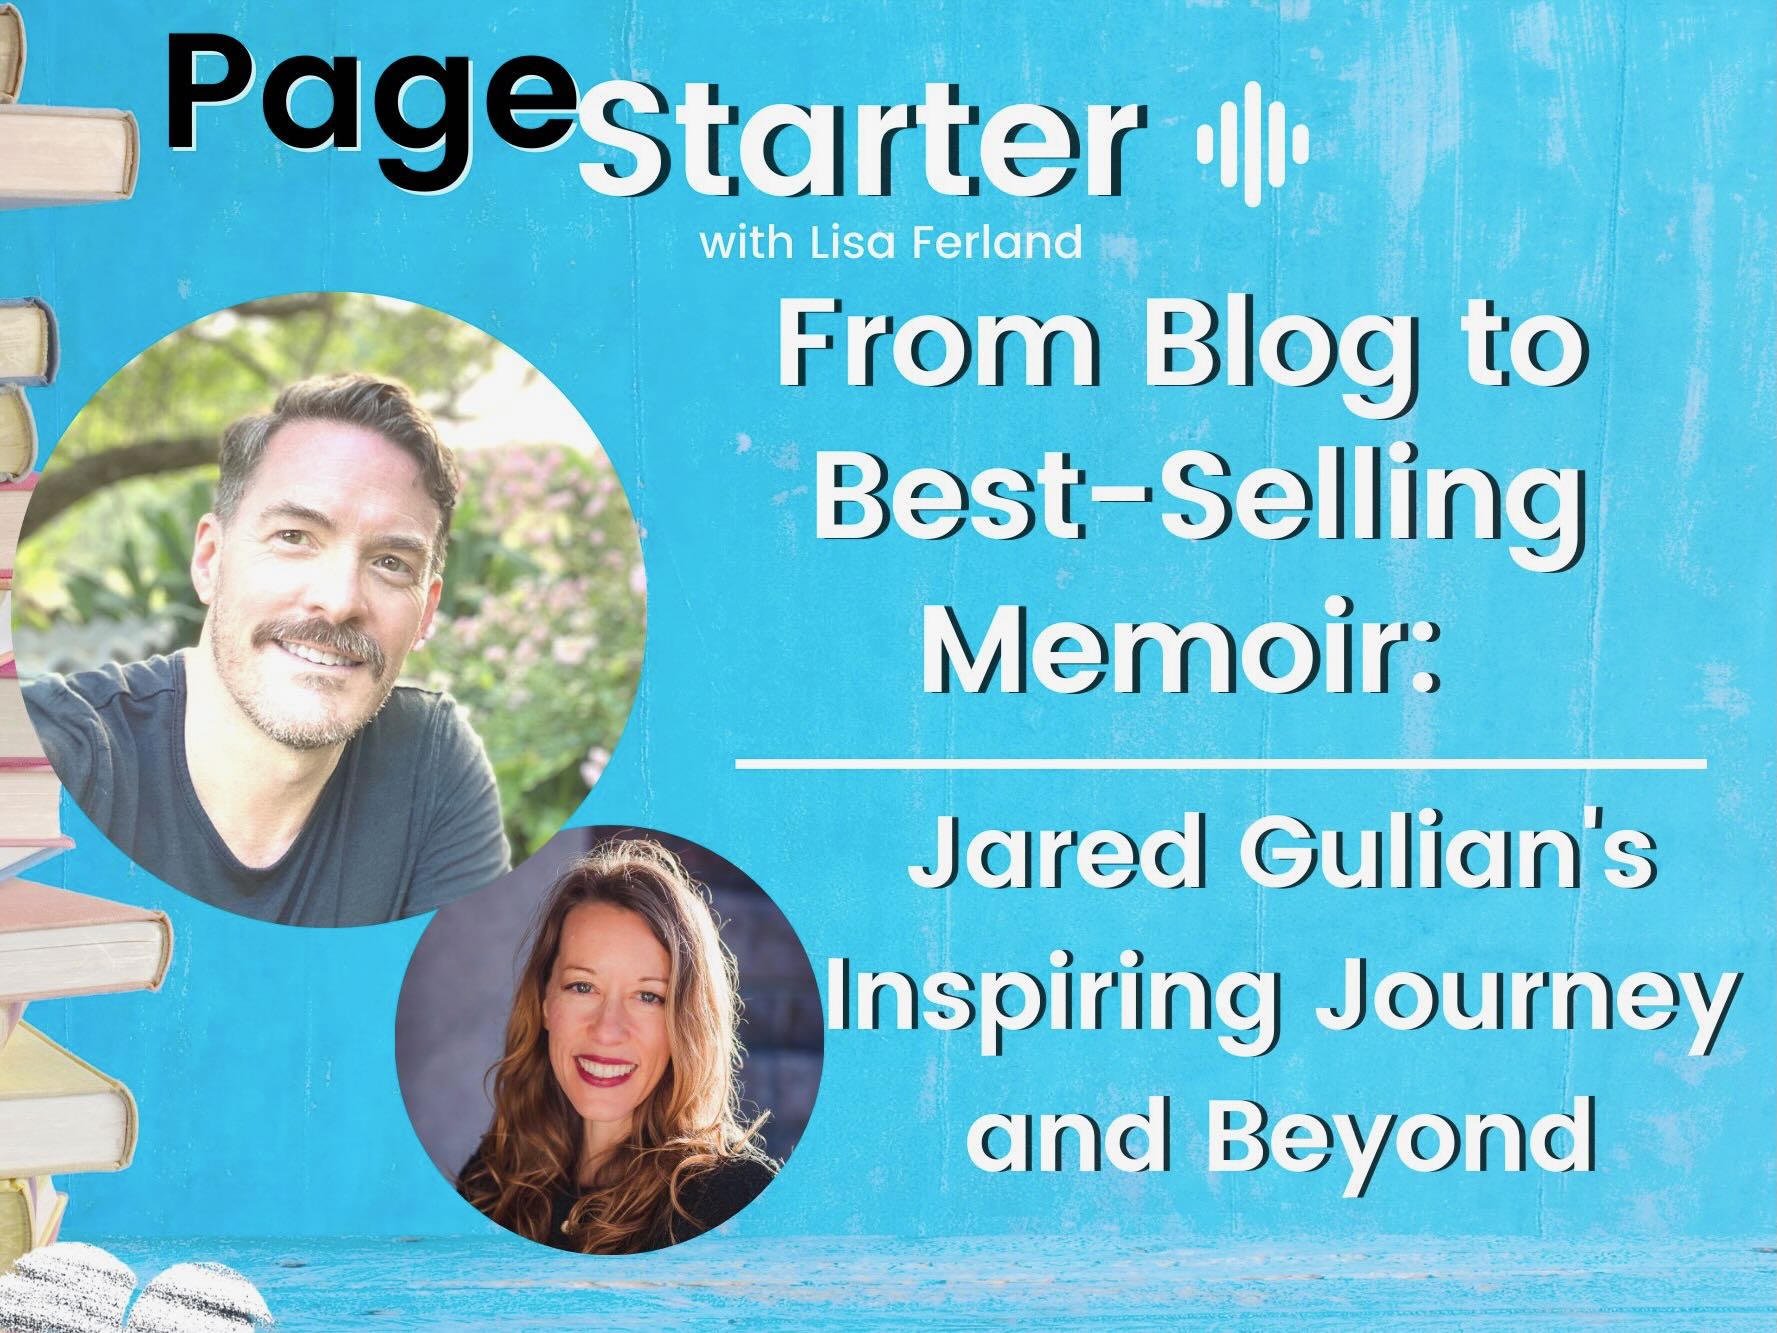 PageStarter podcast: From Blog to Bestselling Memoir